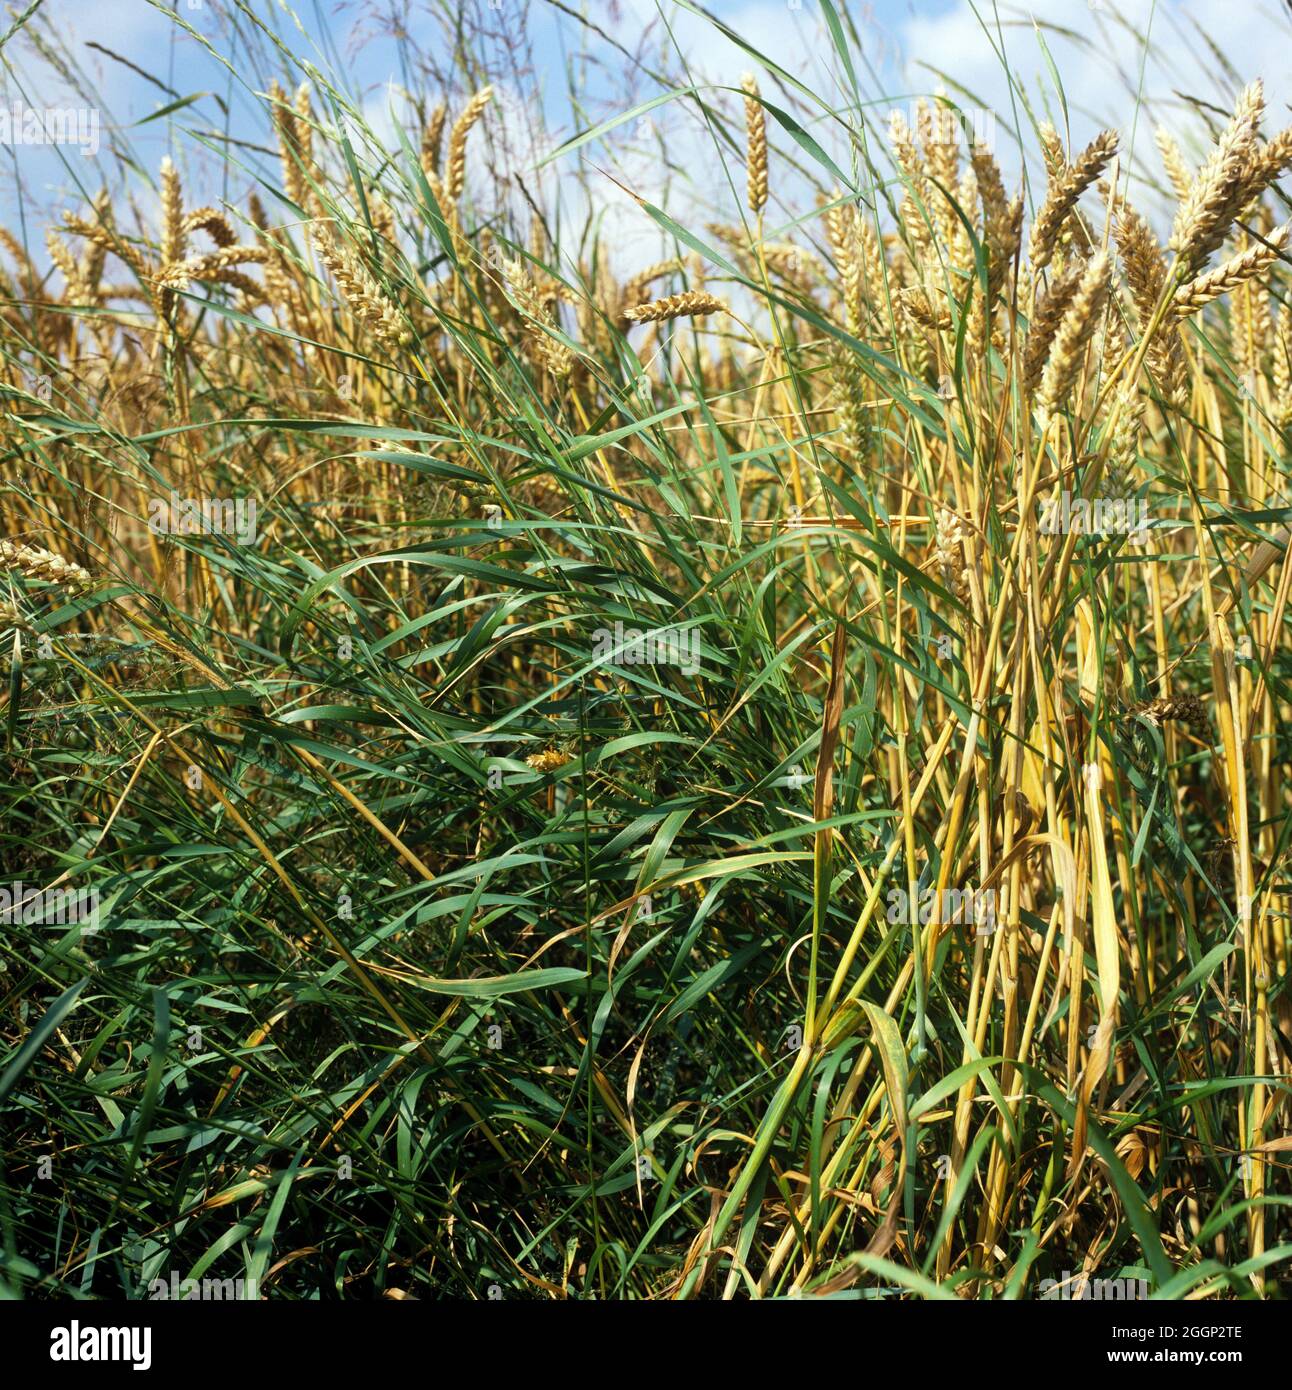 Couch or twitch (Agropyron repens) flowering plants in ripe wheat crop Stock Photo